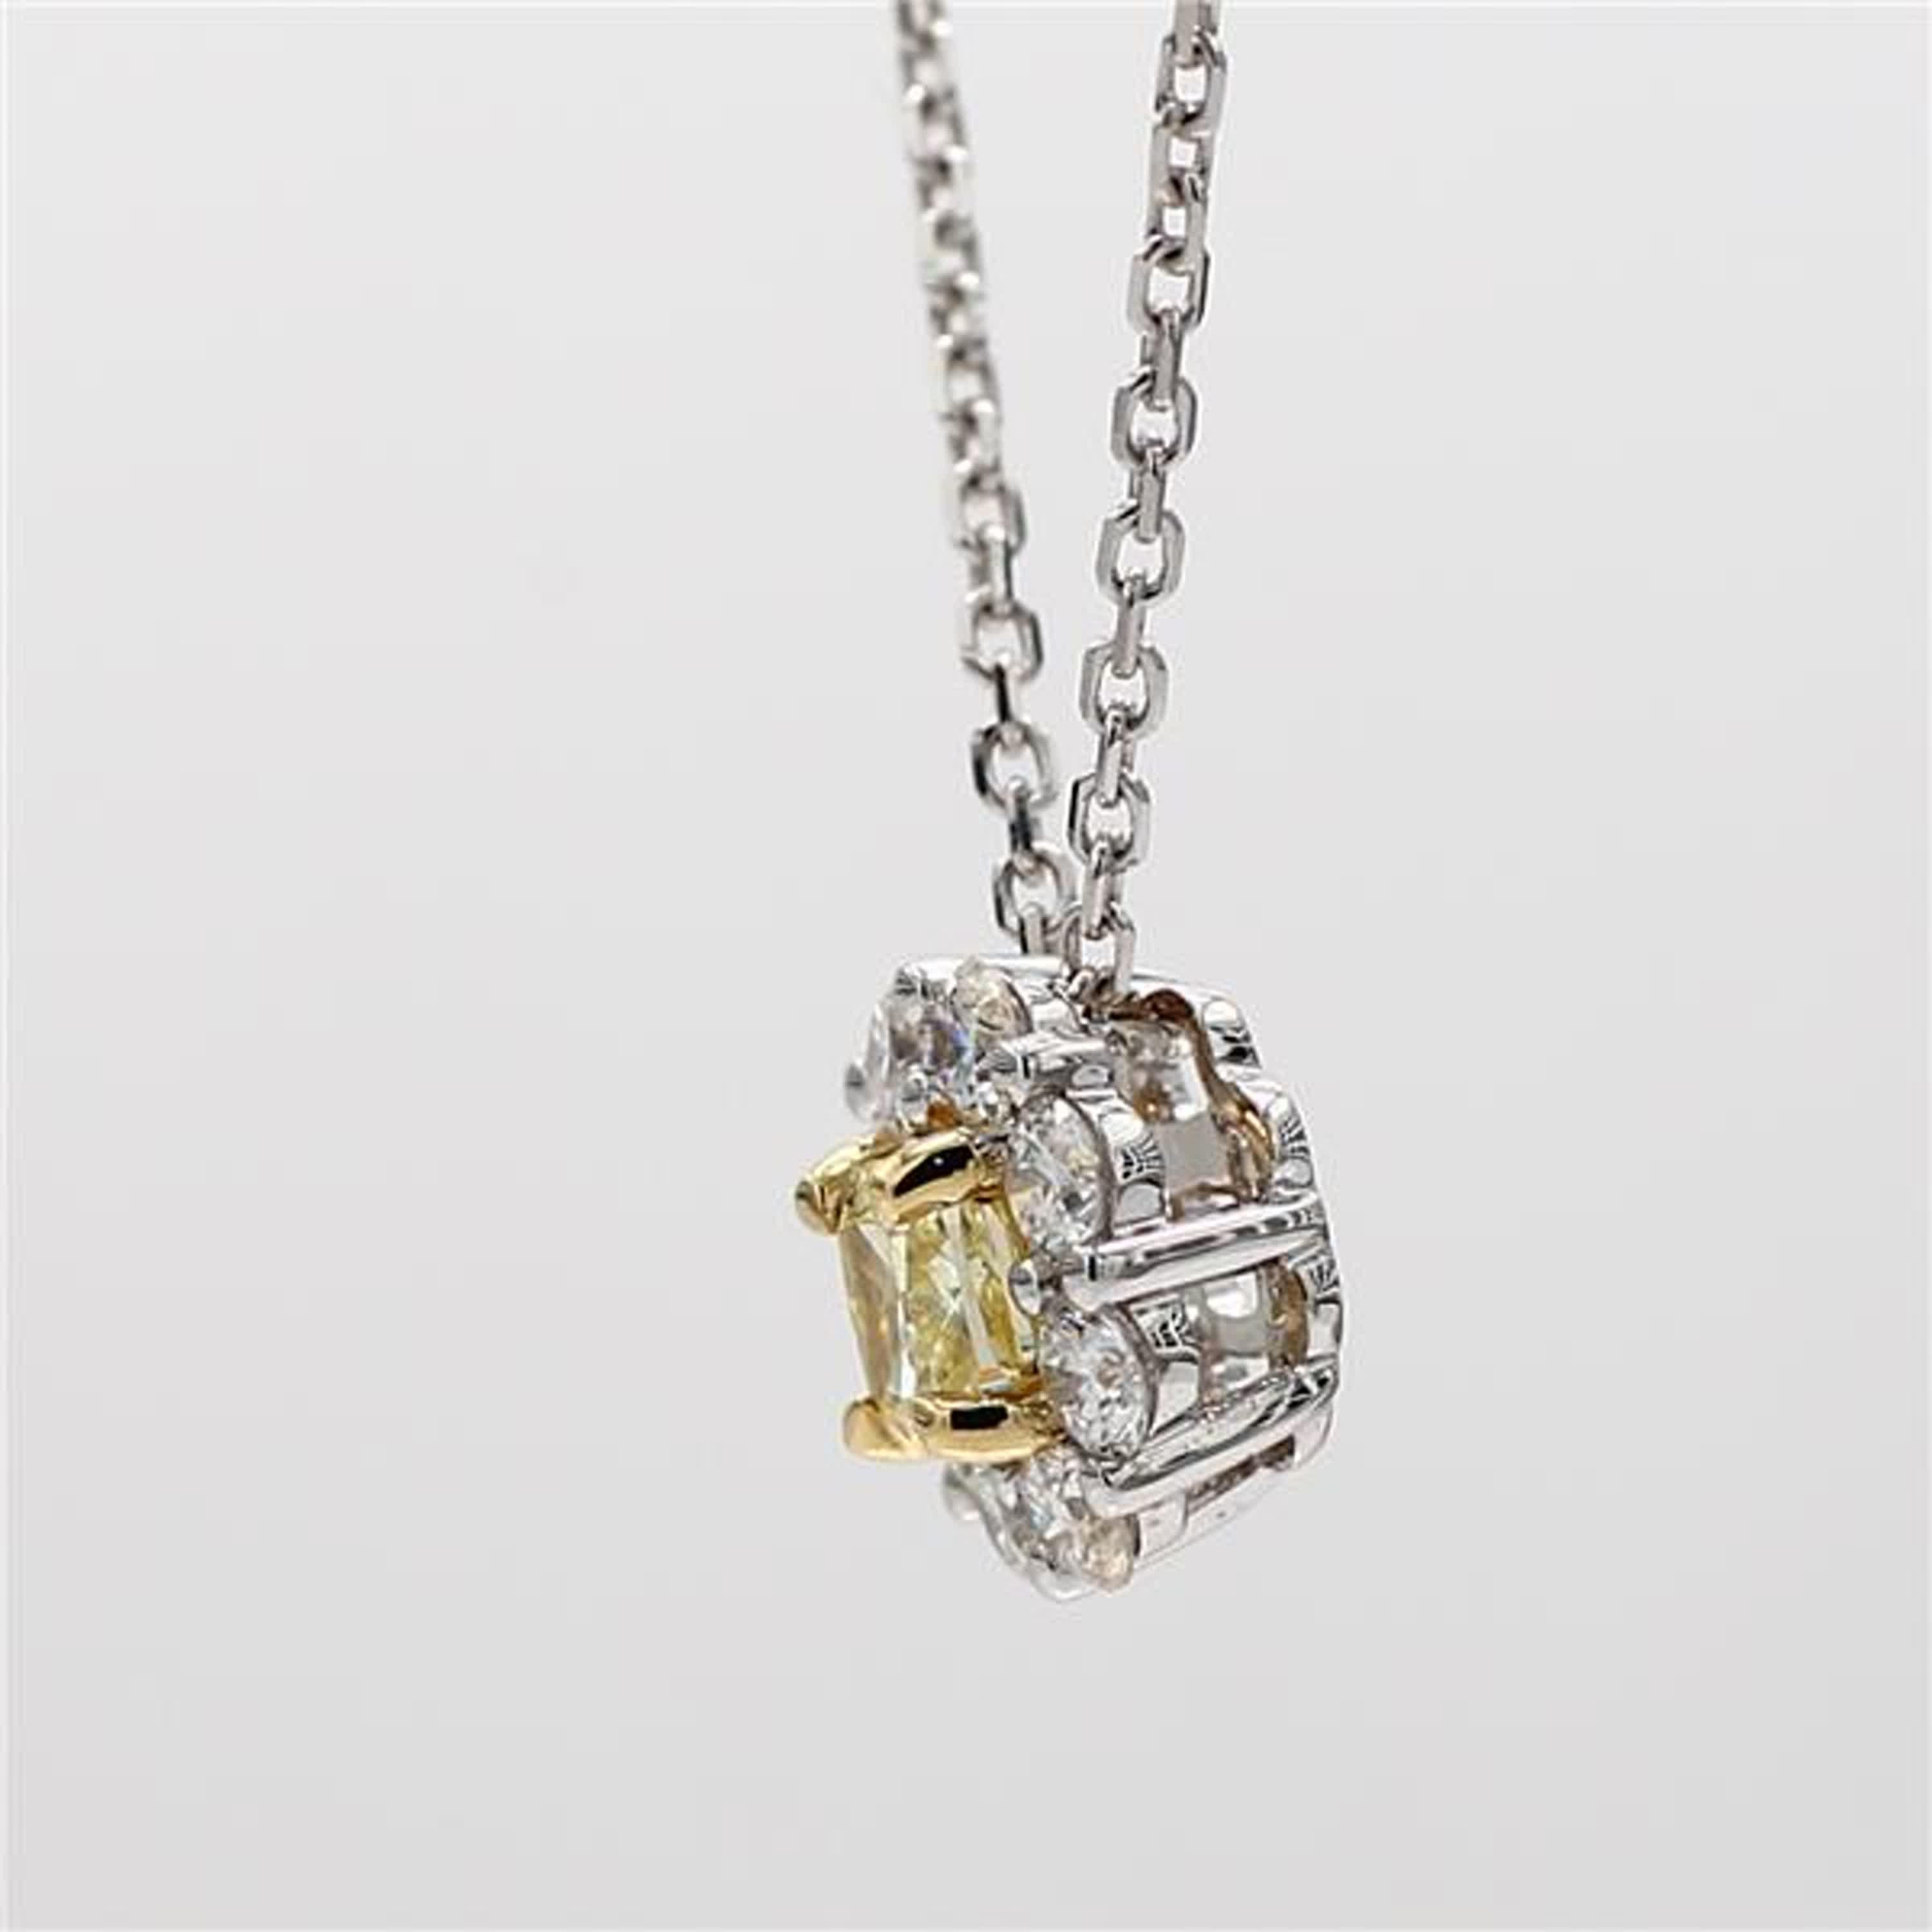 Contemporary Natural Yellow Cushion and White Diamond 1.08 Carat TW Gold Drop Pendant